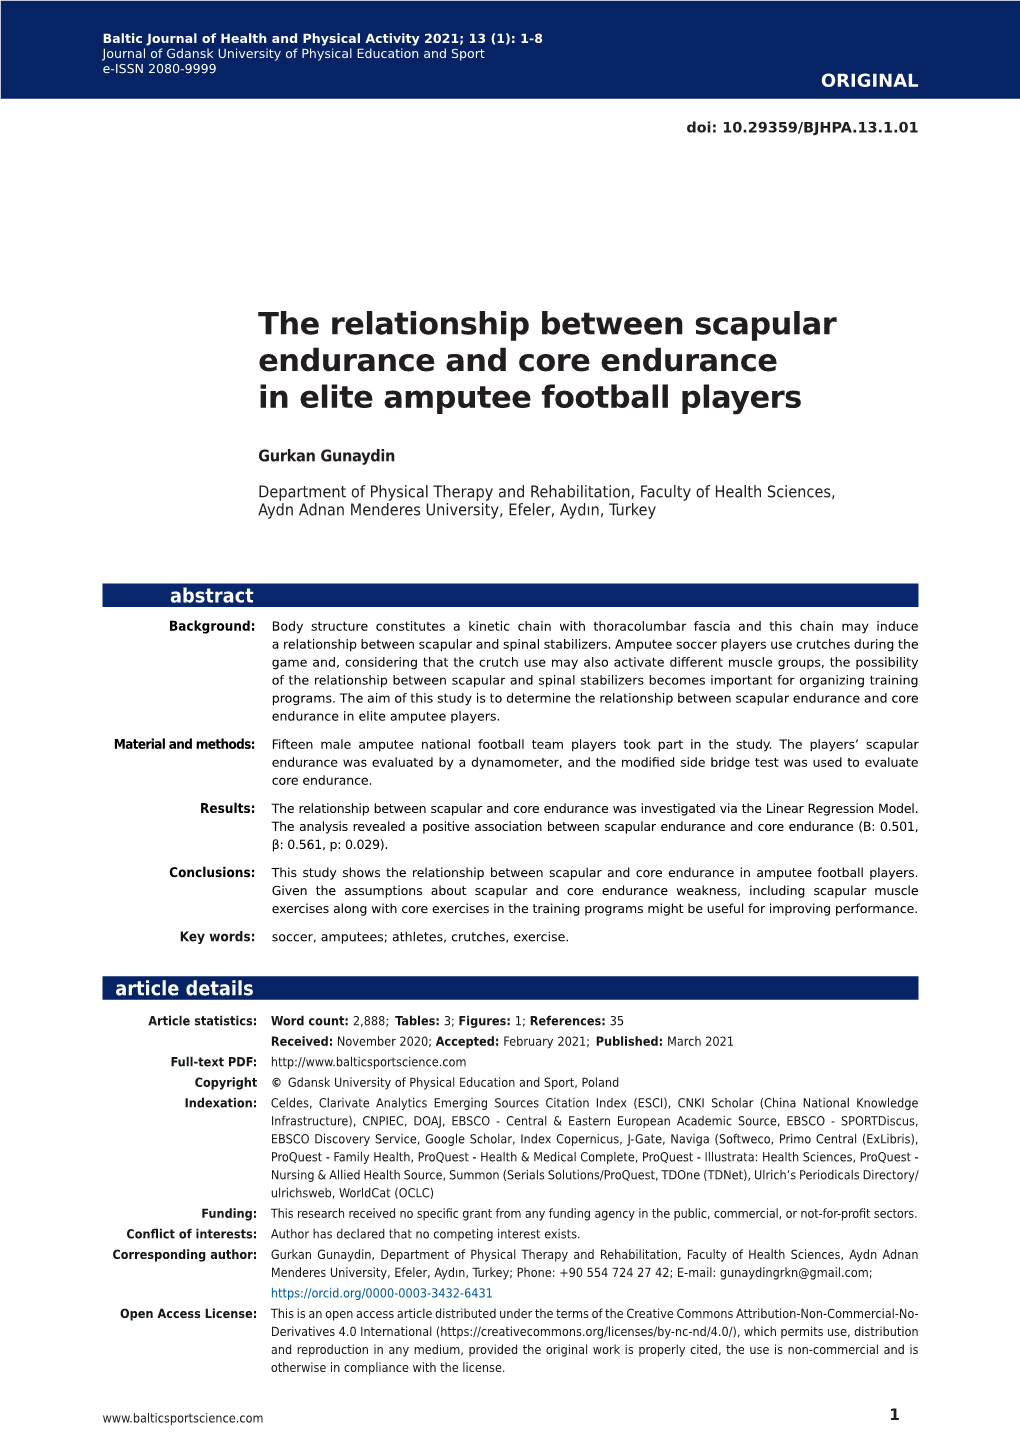 The Relationship Between Scapular Endurance and Core Endurance in Elite Amputee Football Players